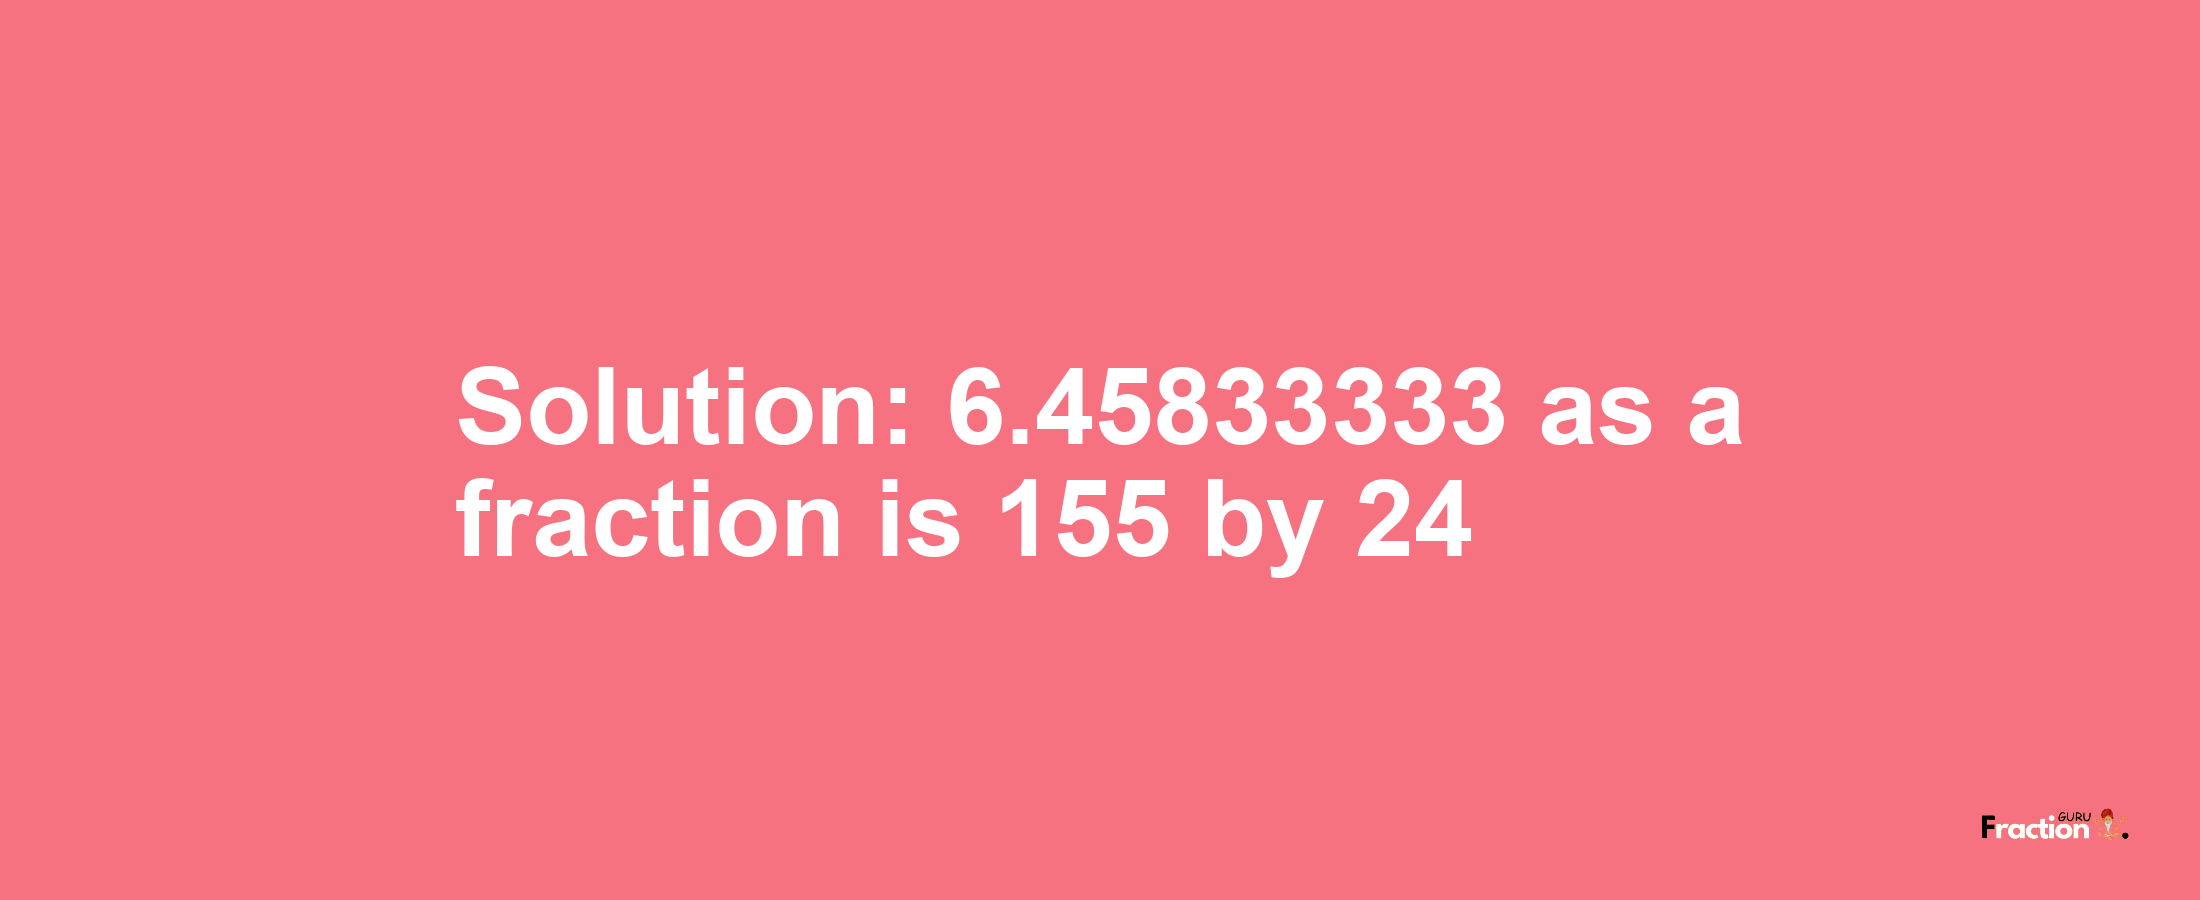 Solution:6.45833333 as a fraction is 155/24